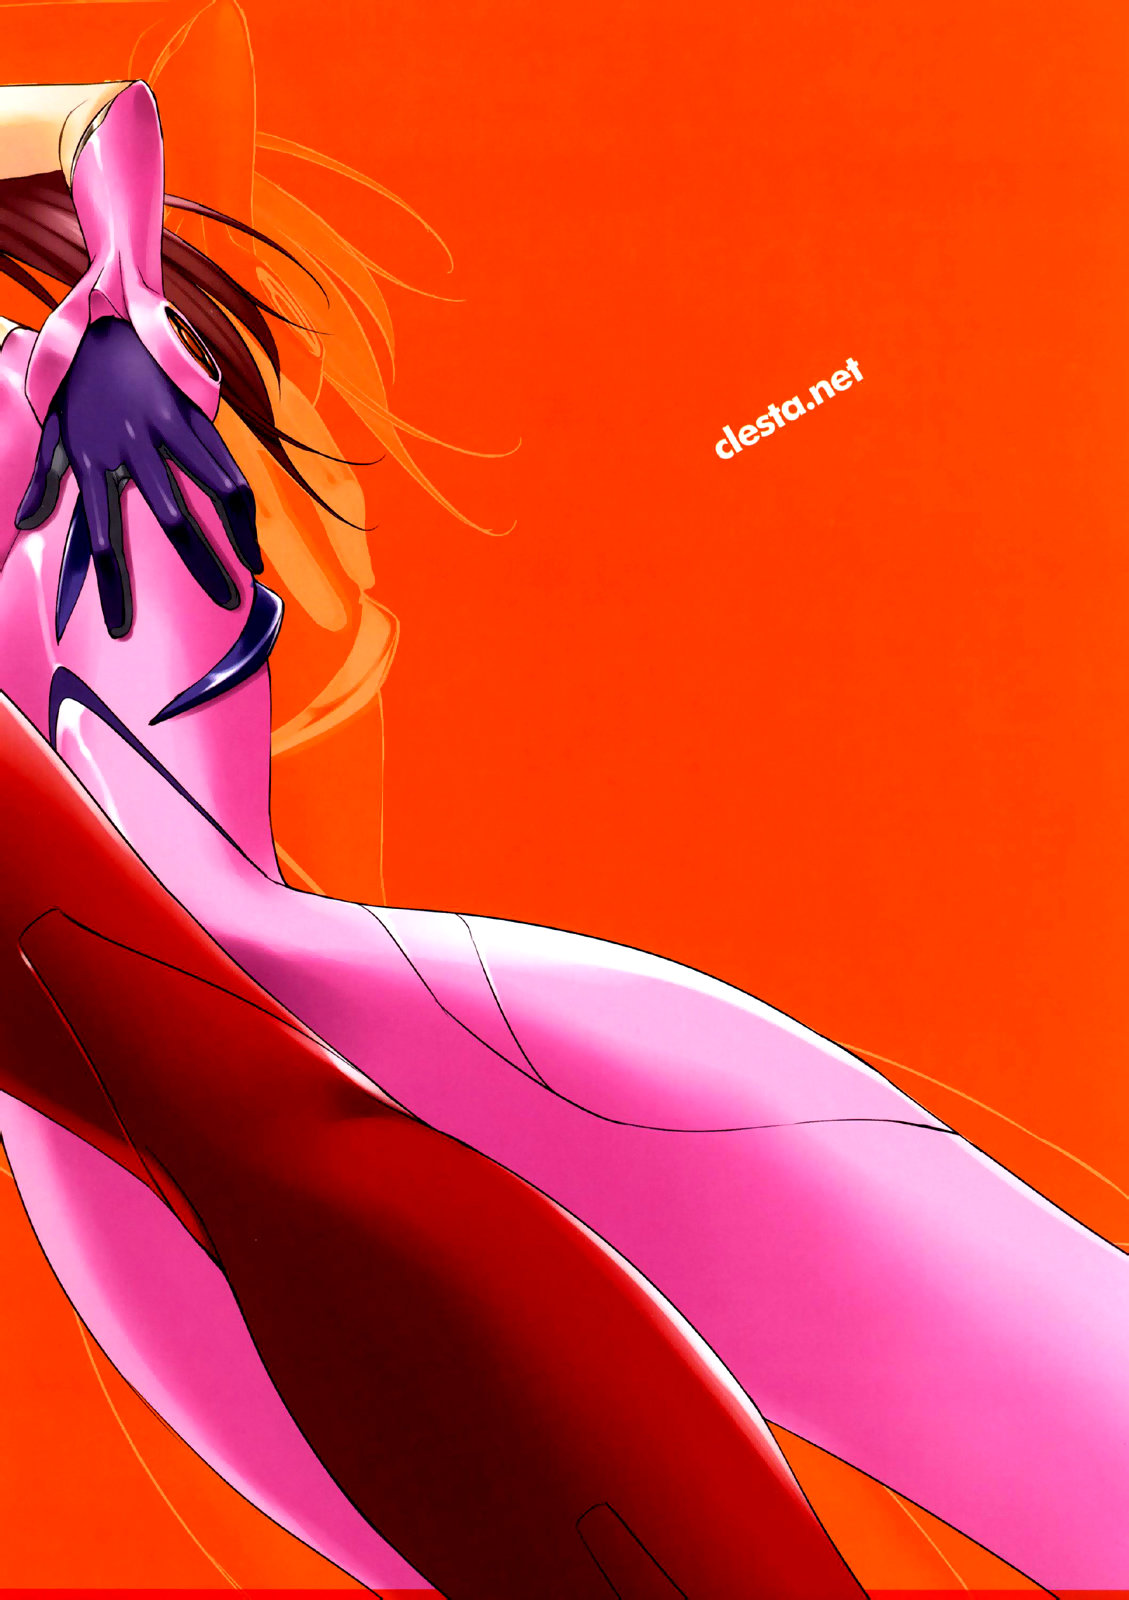 CL-orz 13 You Can (Not) Advance (uncensored) (Neon Genesis Evangelion) - Cle Masahi - 15